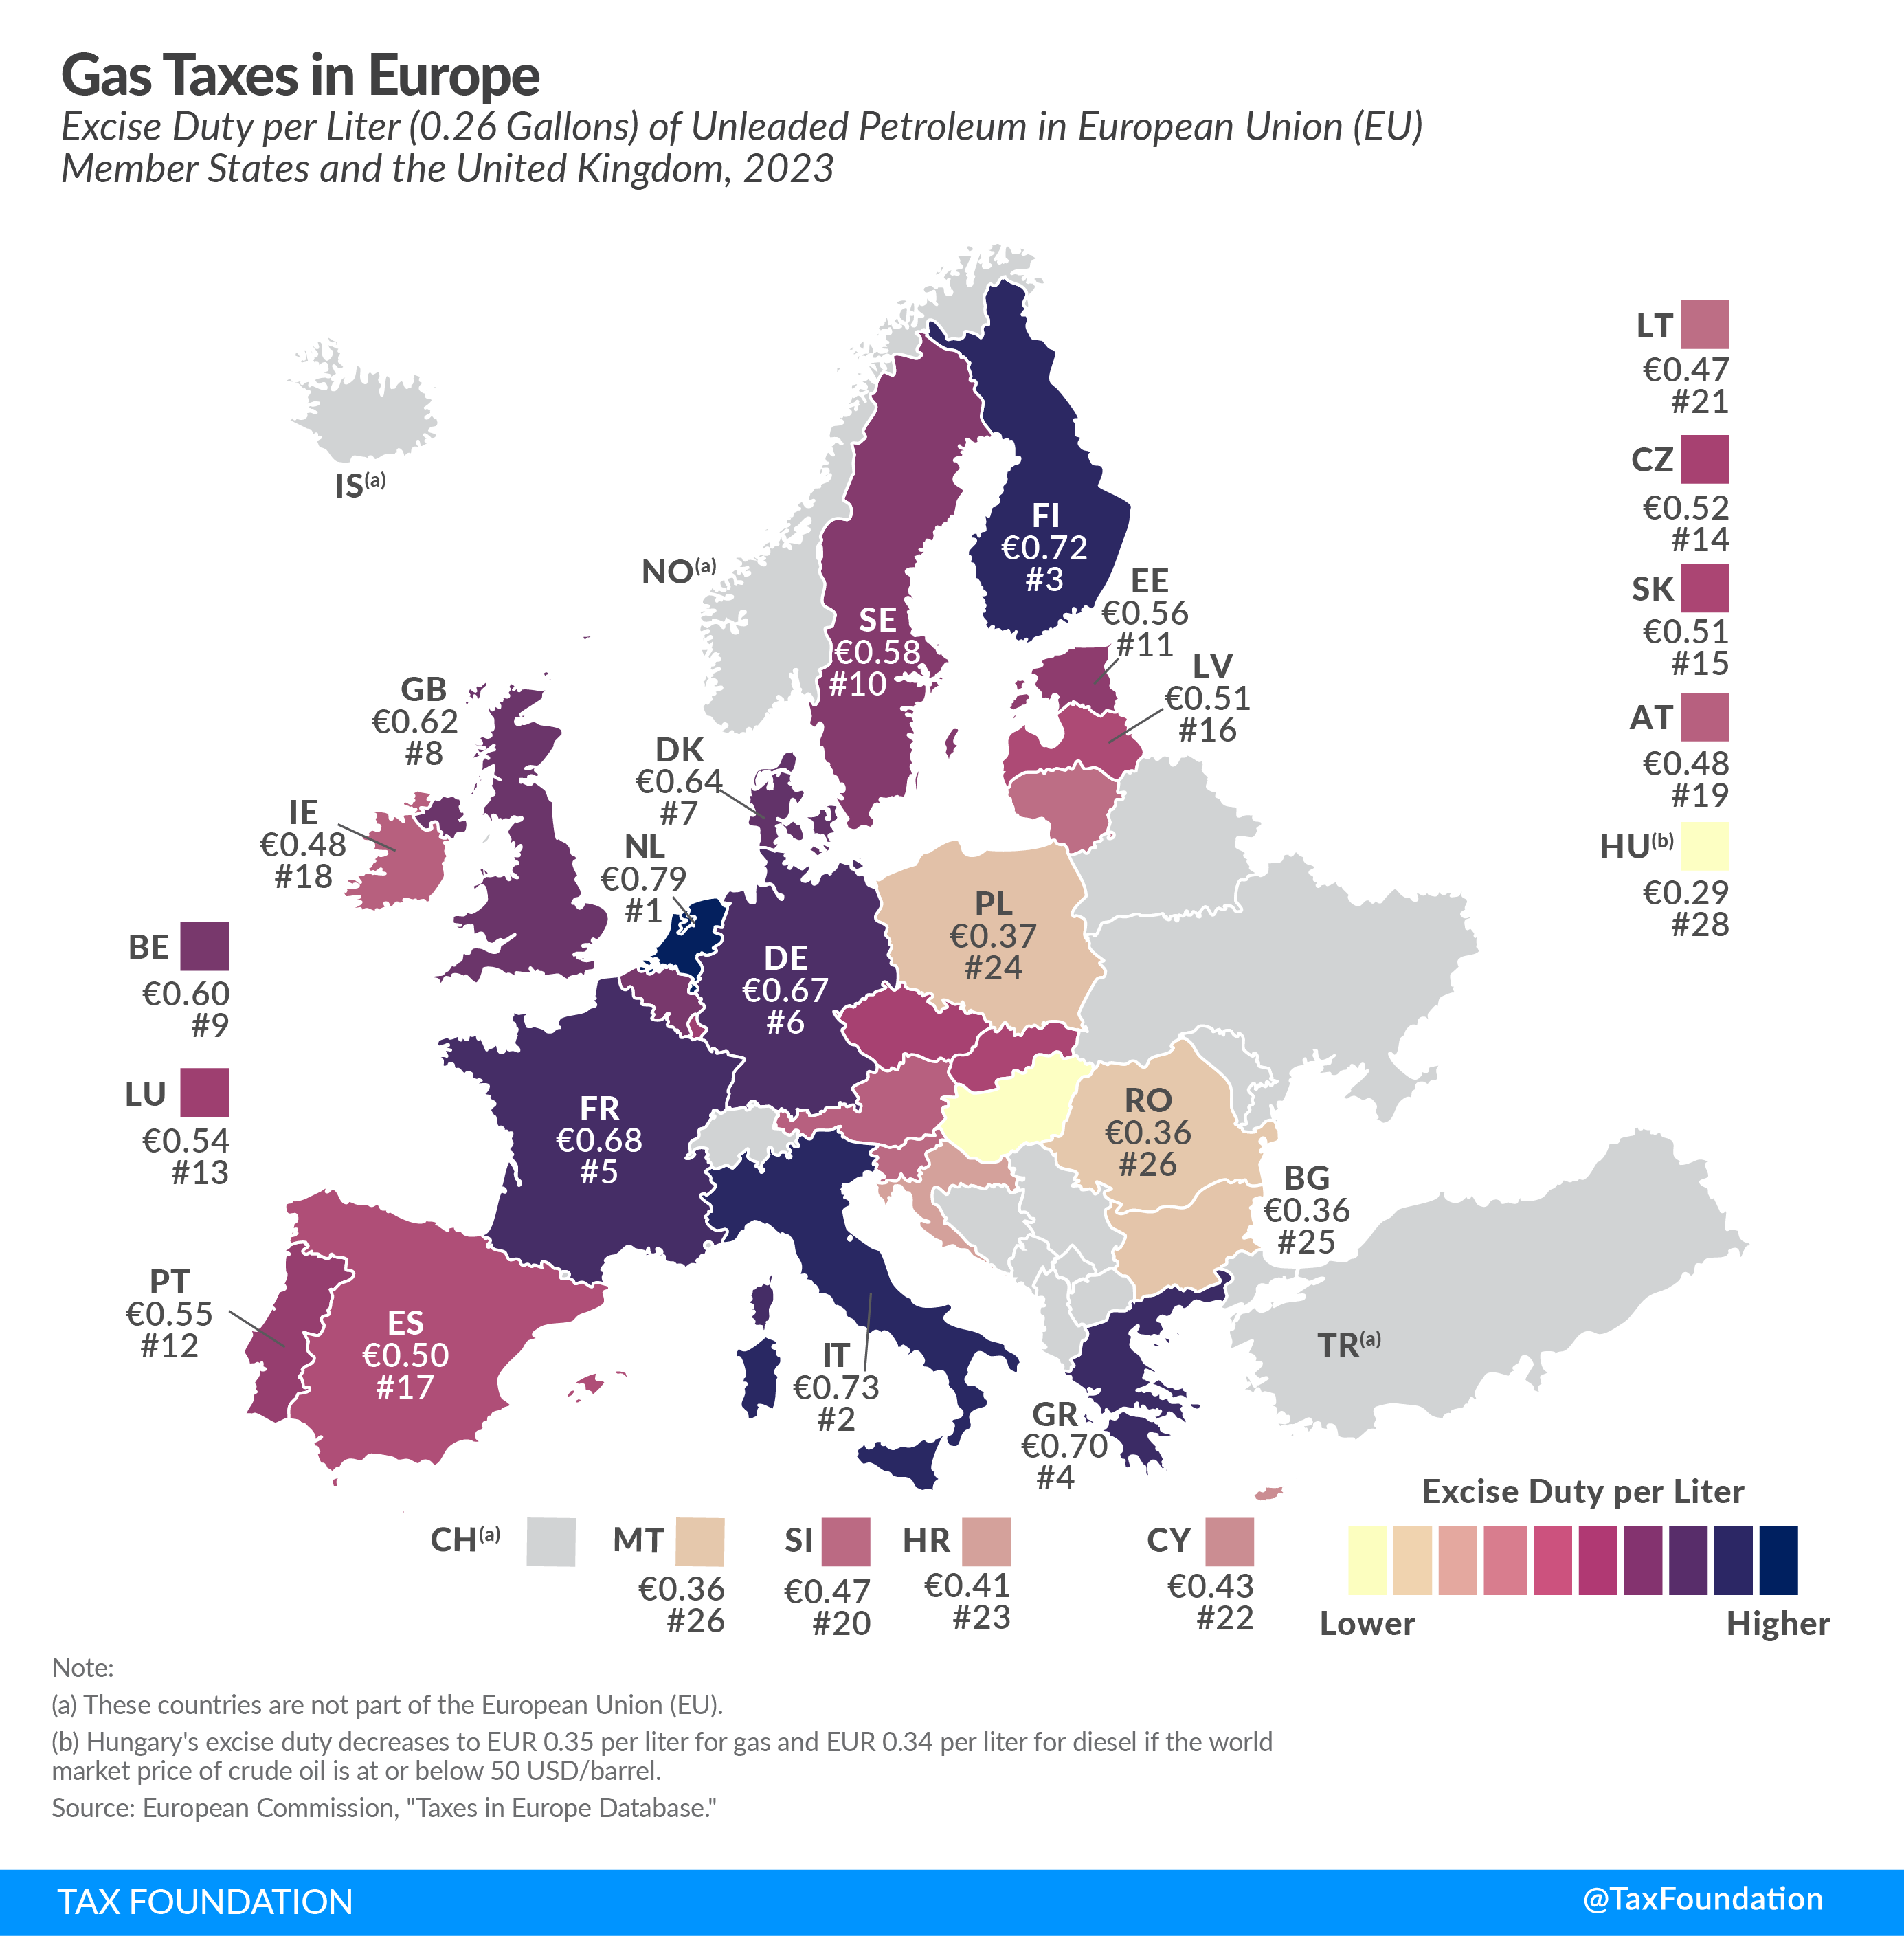 Diesel and gas taxes in Europe 2023 fuel tax rates including diesel taxes and gas taxes in Europe